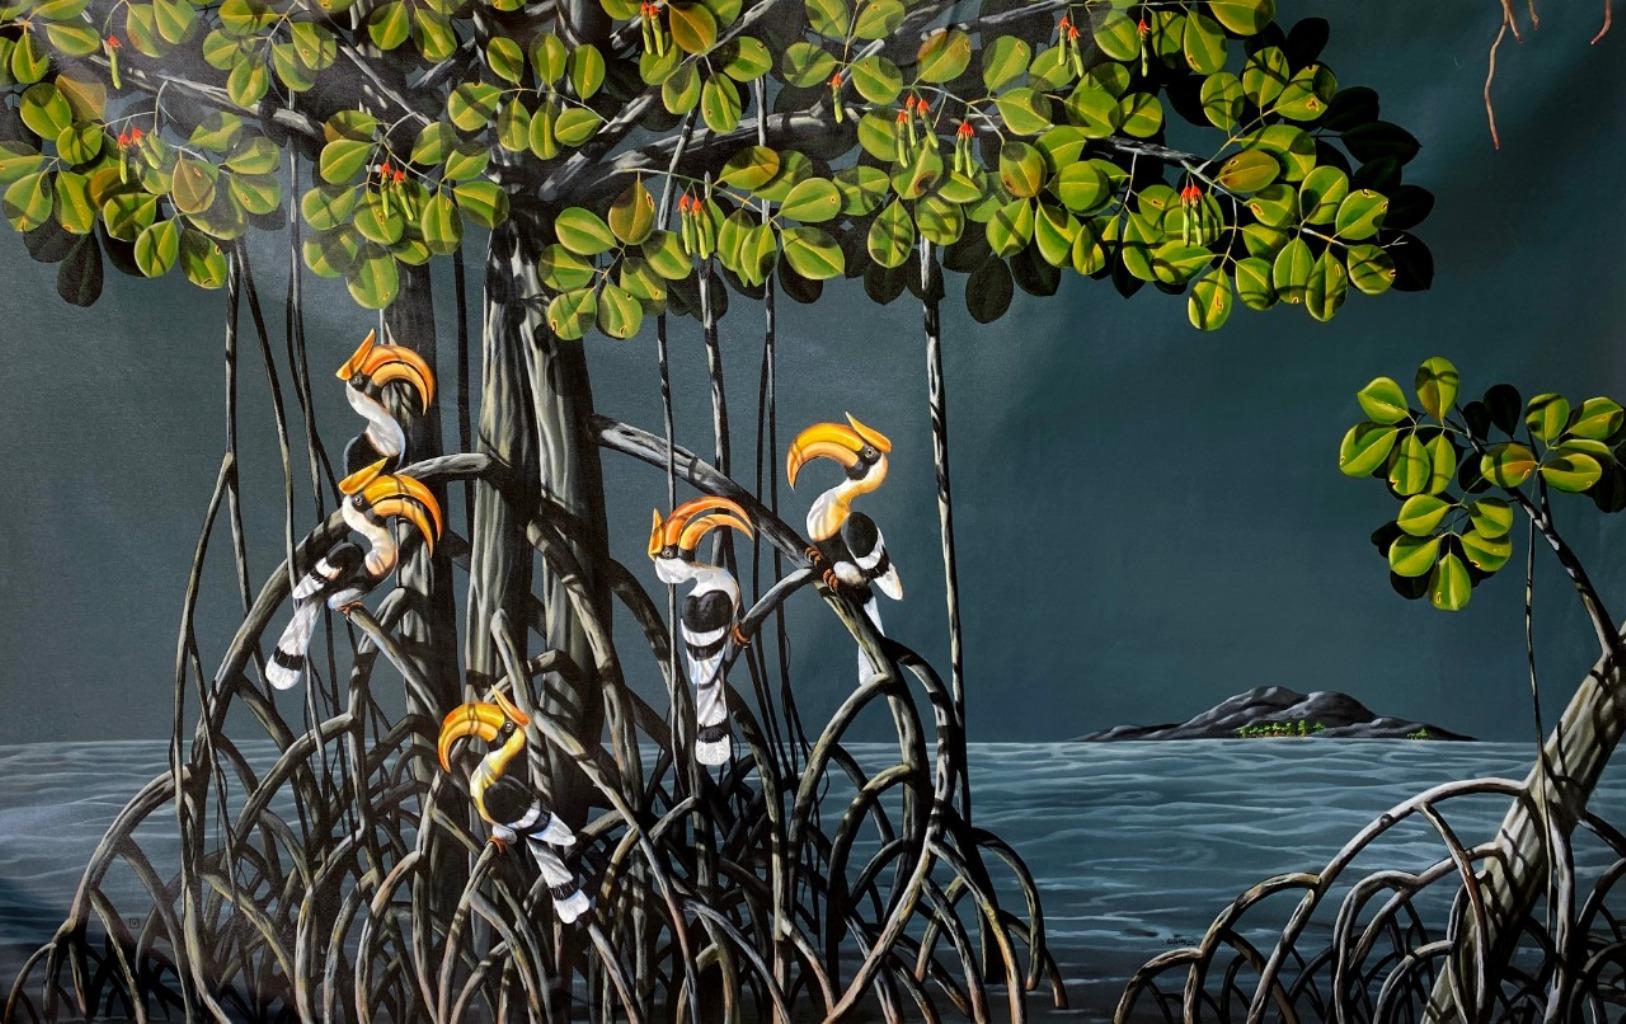 Varghese Kalathil Figurative Painting - Blooming Spring Mangroves, Acrylic on Canvas by Contemporary Artist "In Stock"